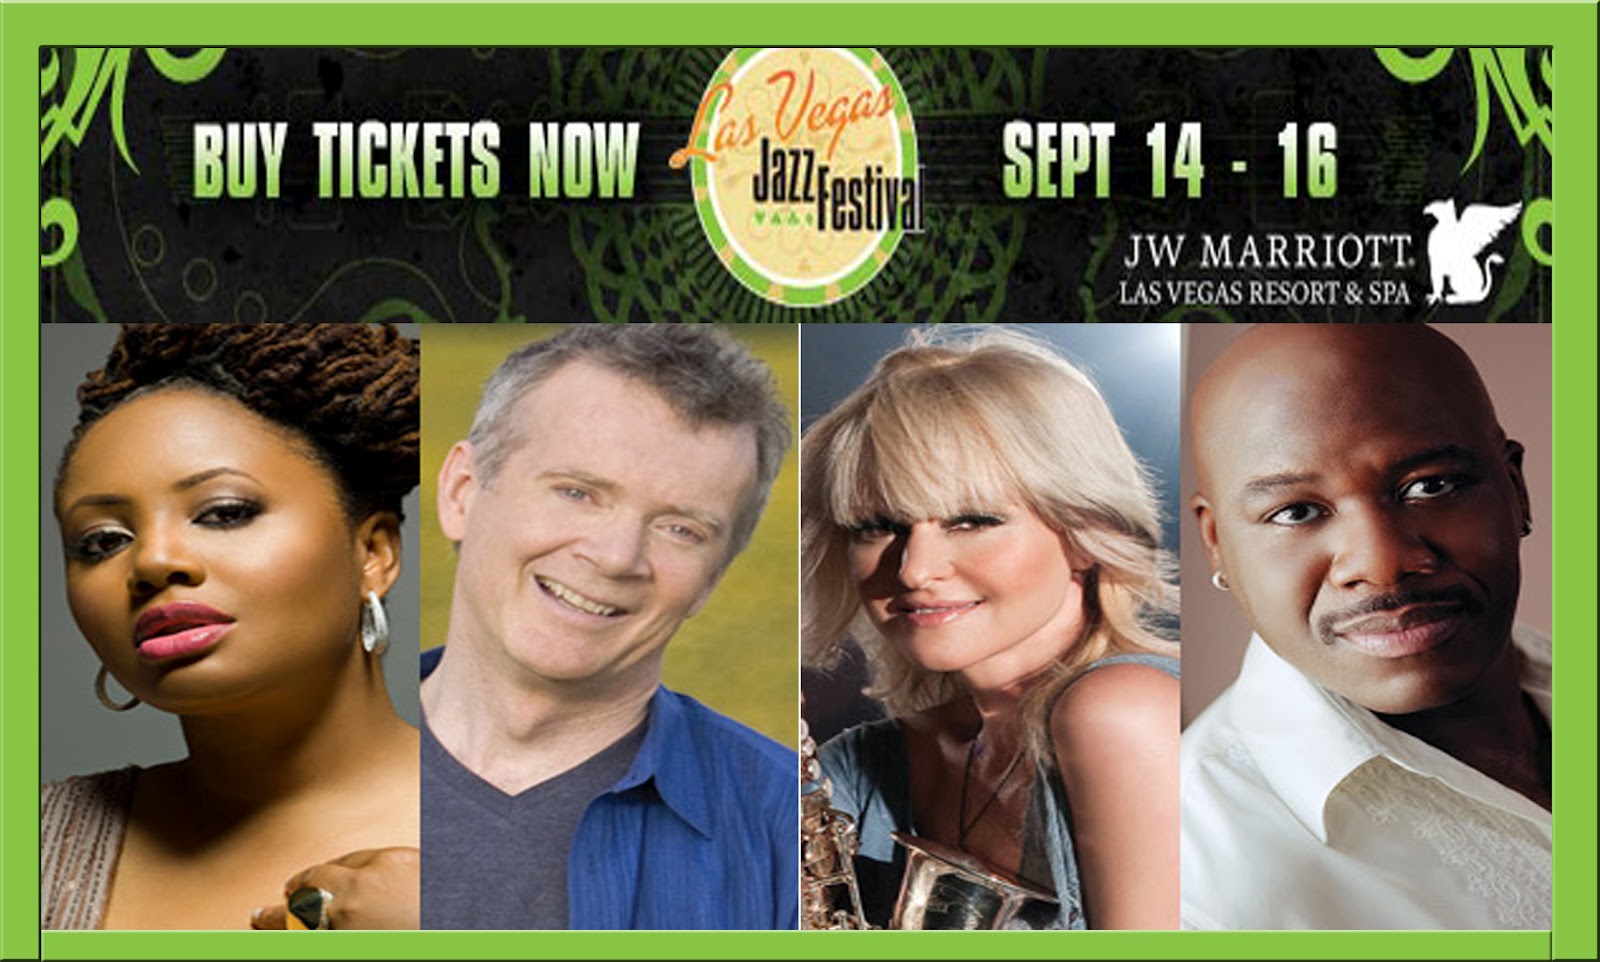 Eagle One Promotions Las Vegas Jazz Festival!!! Buy Your Tickets Now!!!